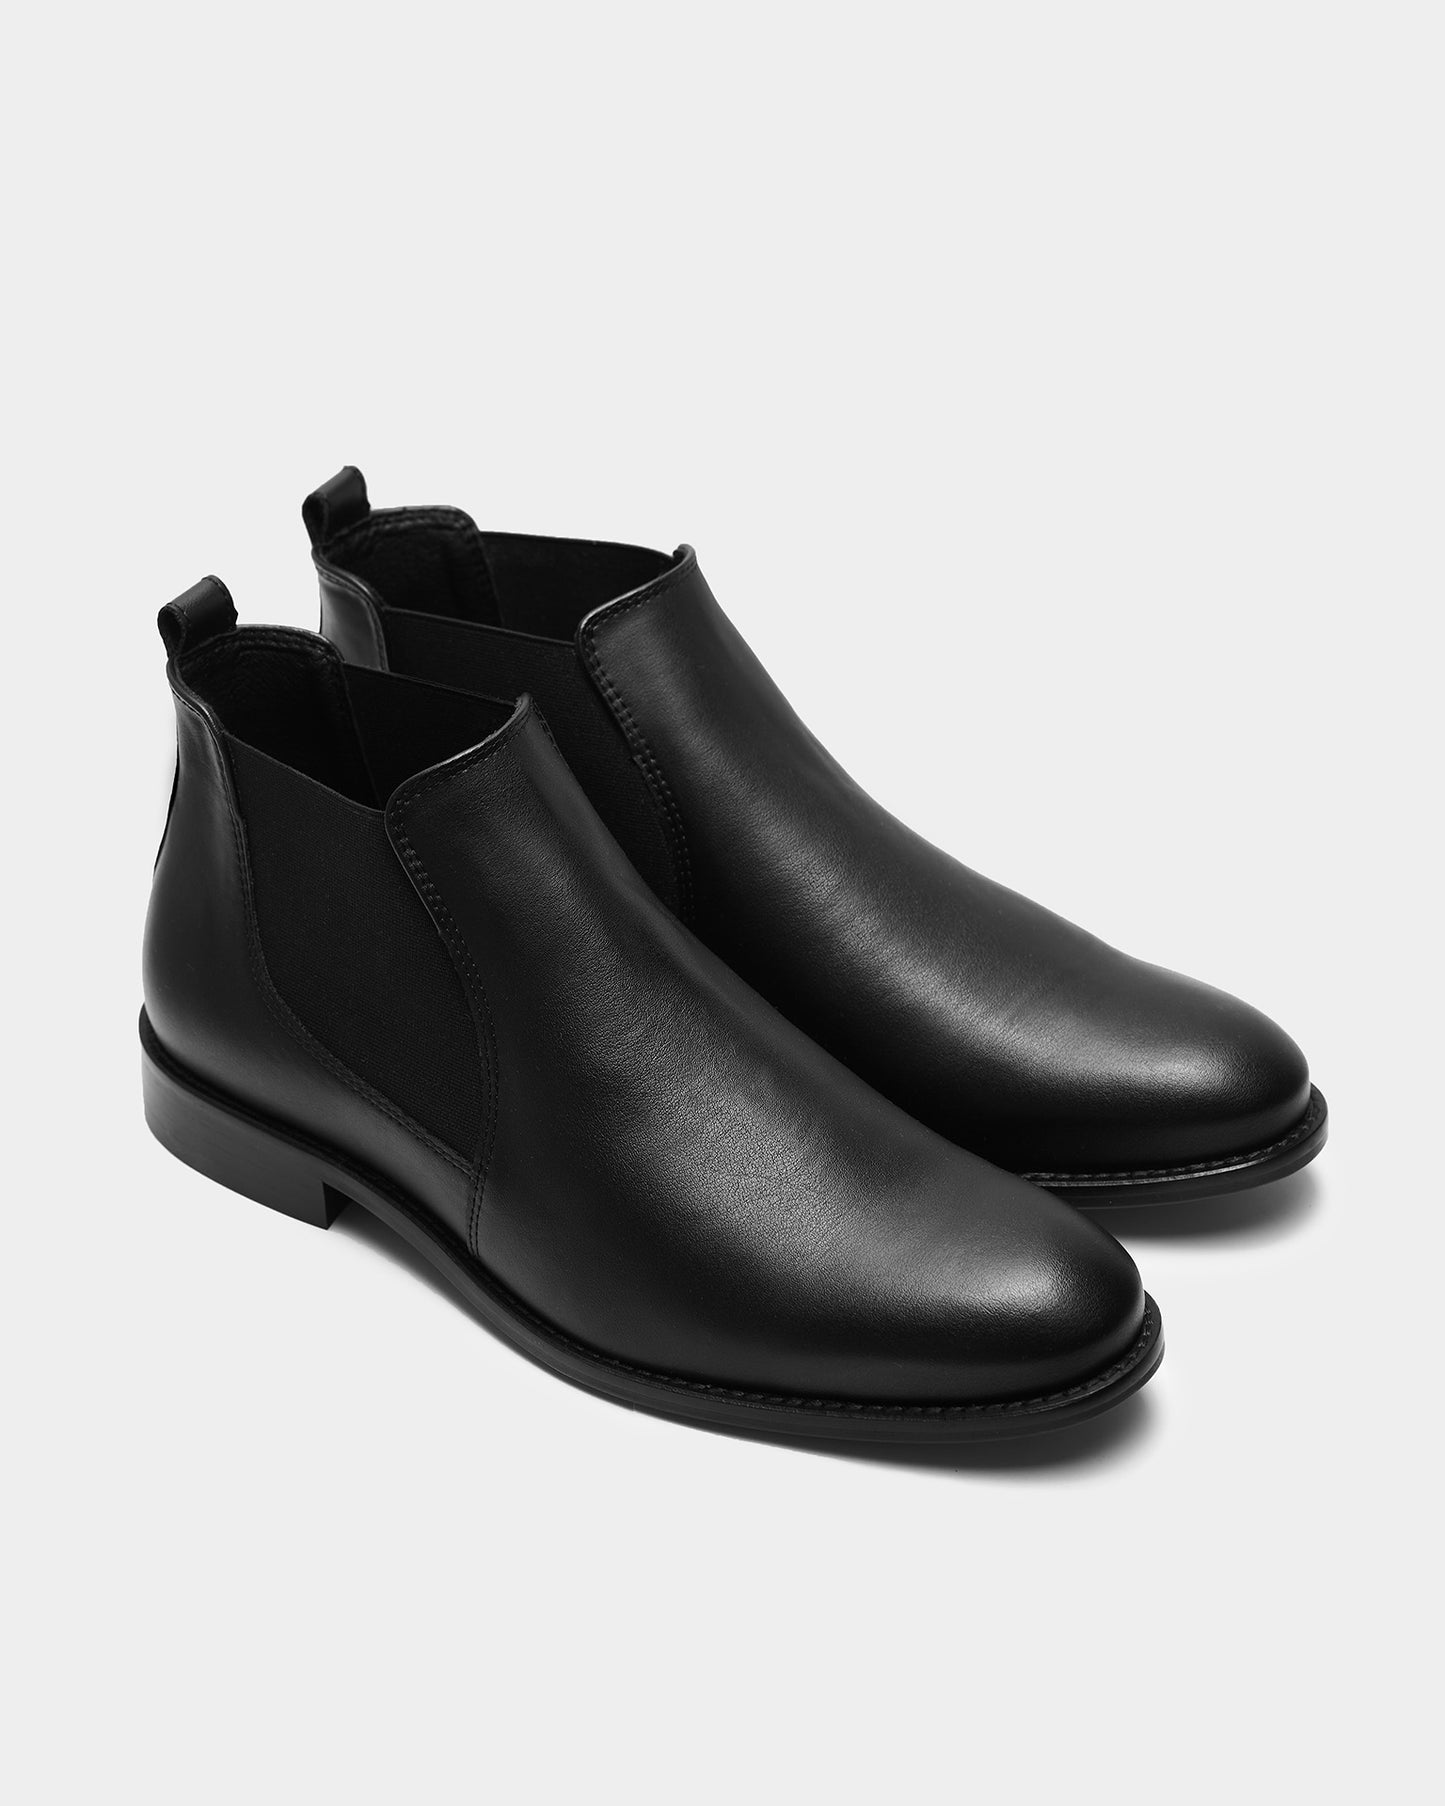 Dean Chelsea Boots made of vegan grape leather